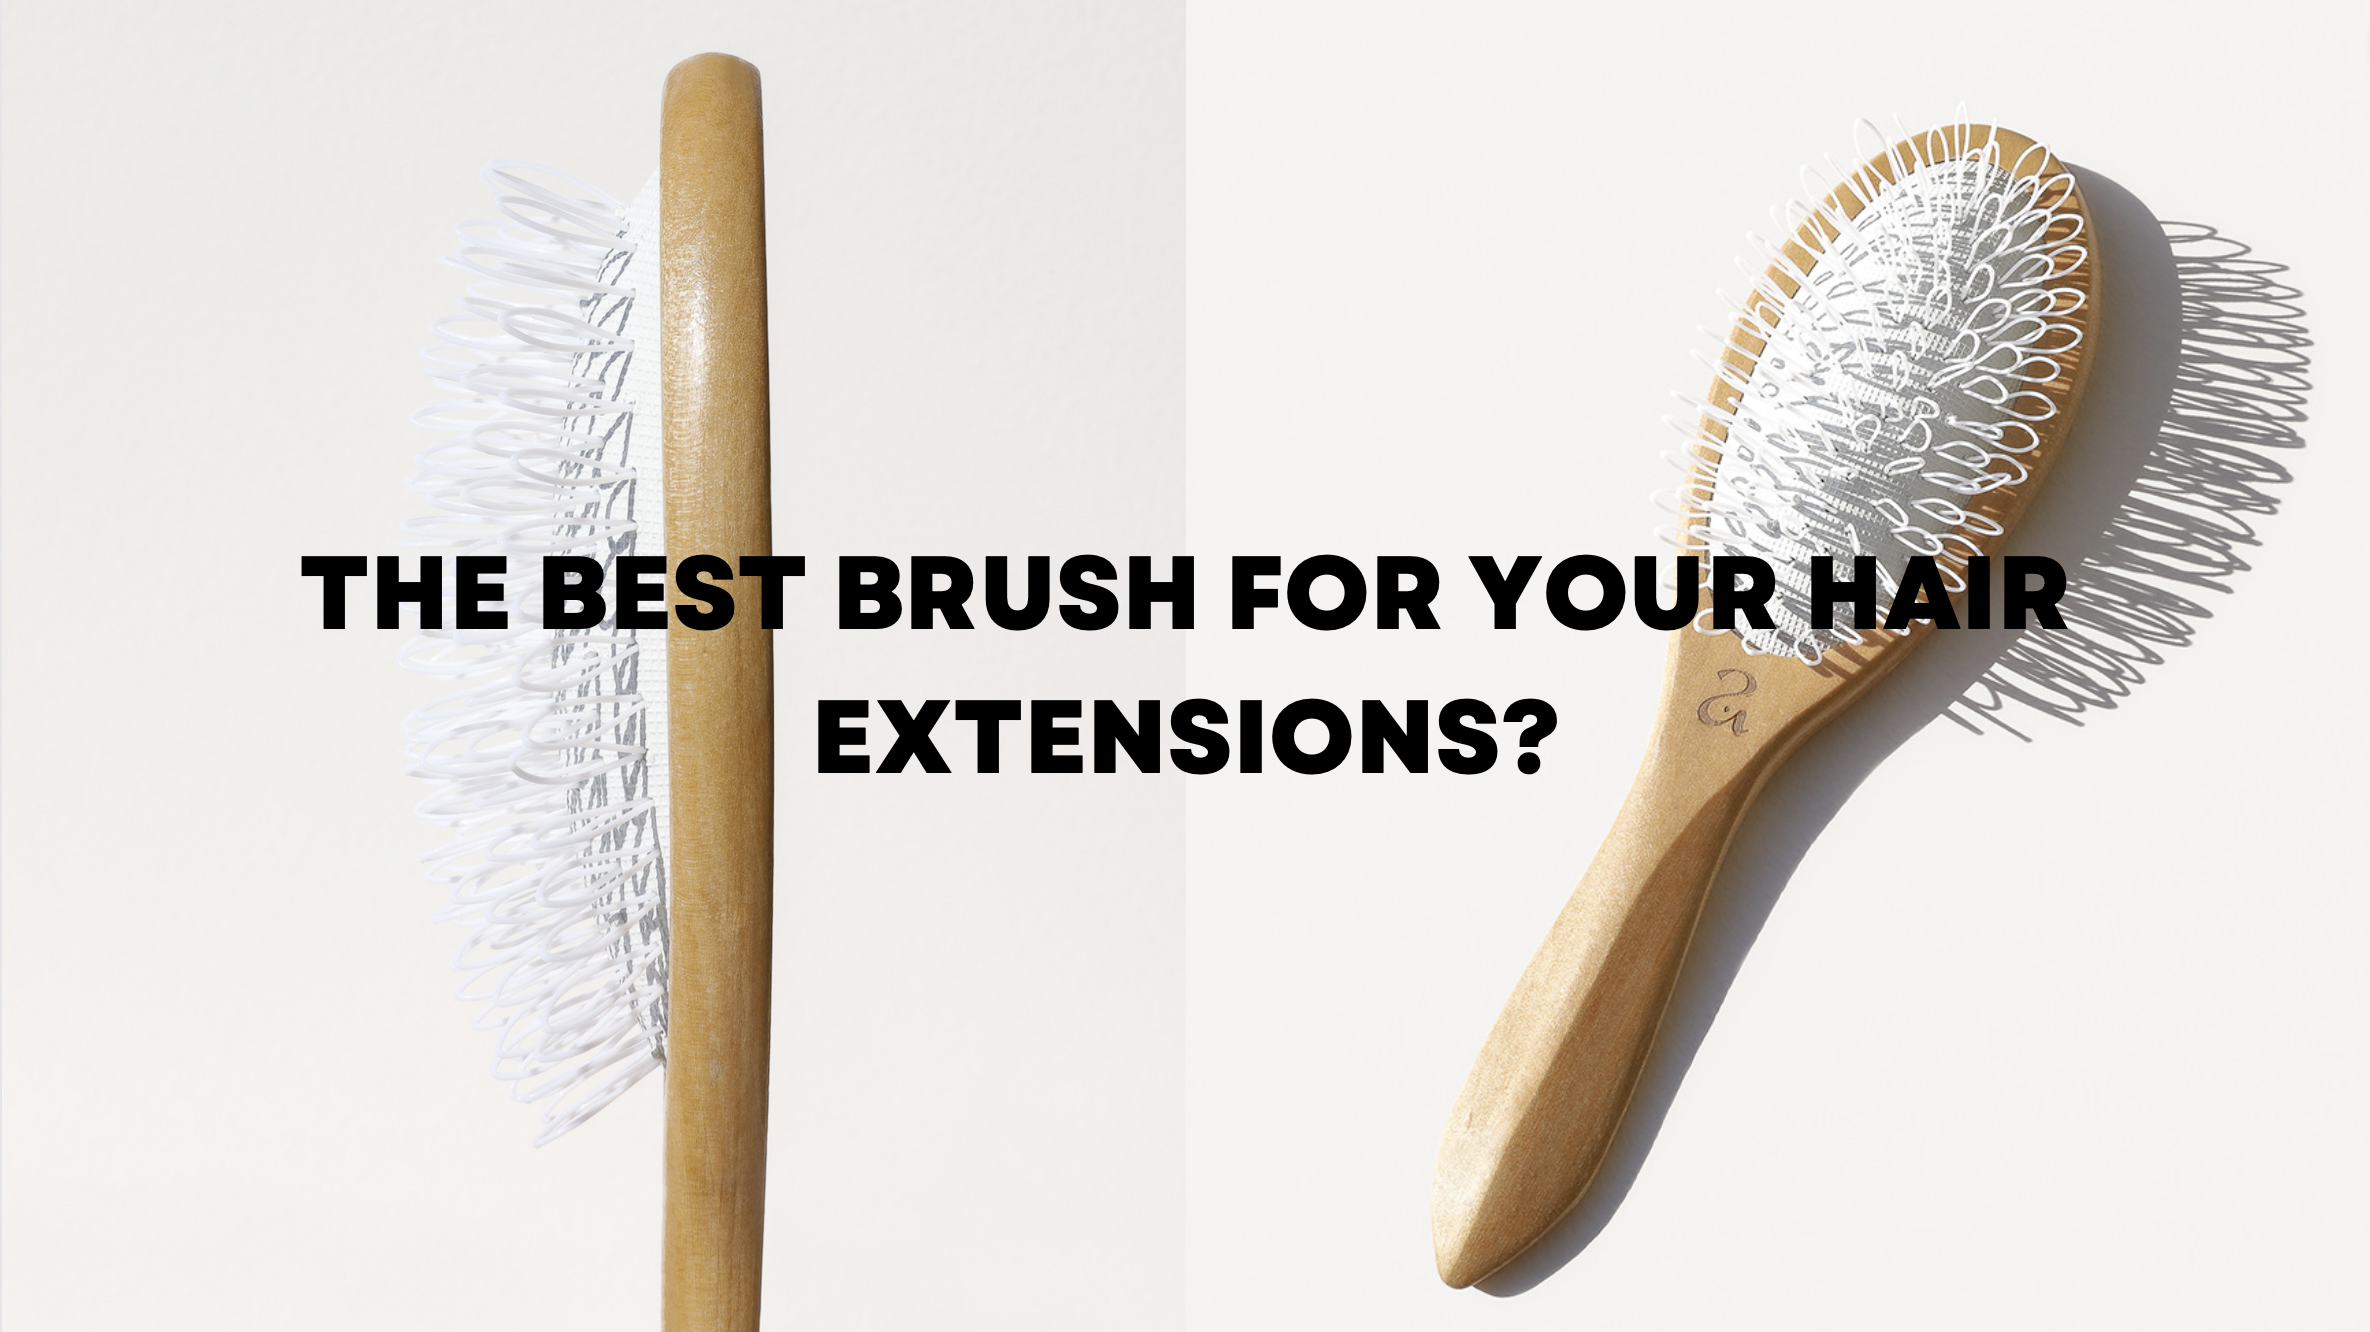 The Best Brush For You Hair Extensions? What Is A Loop Brush?